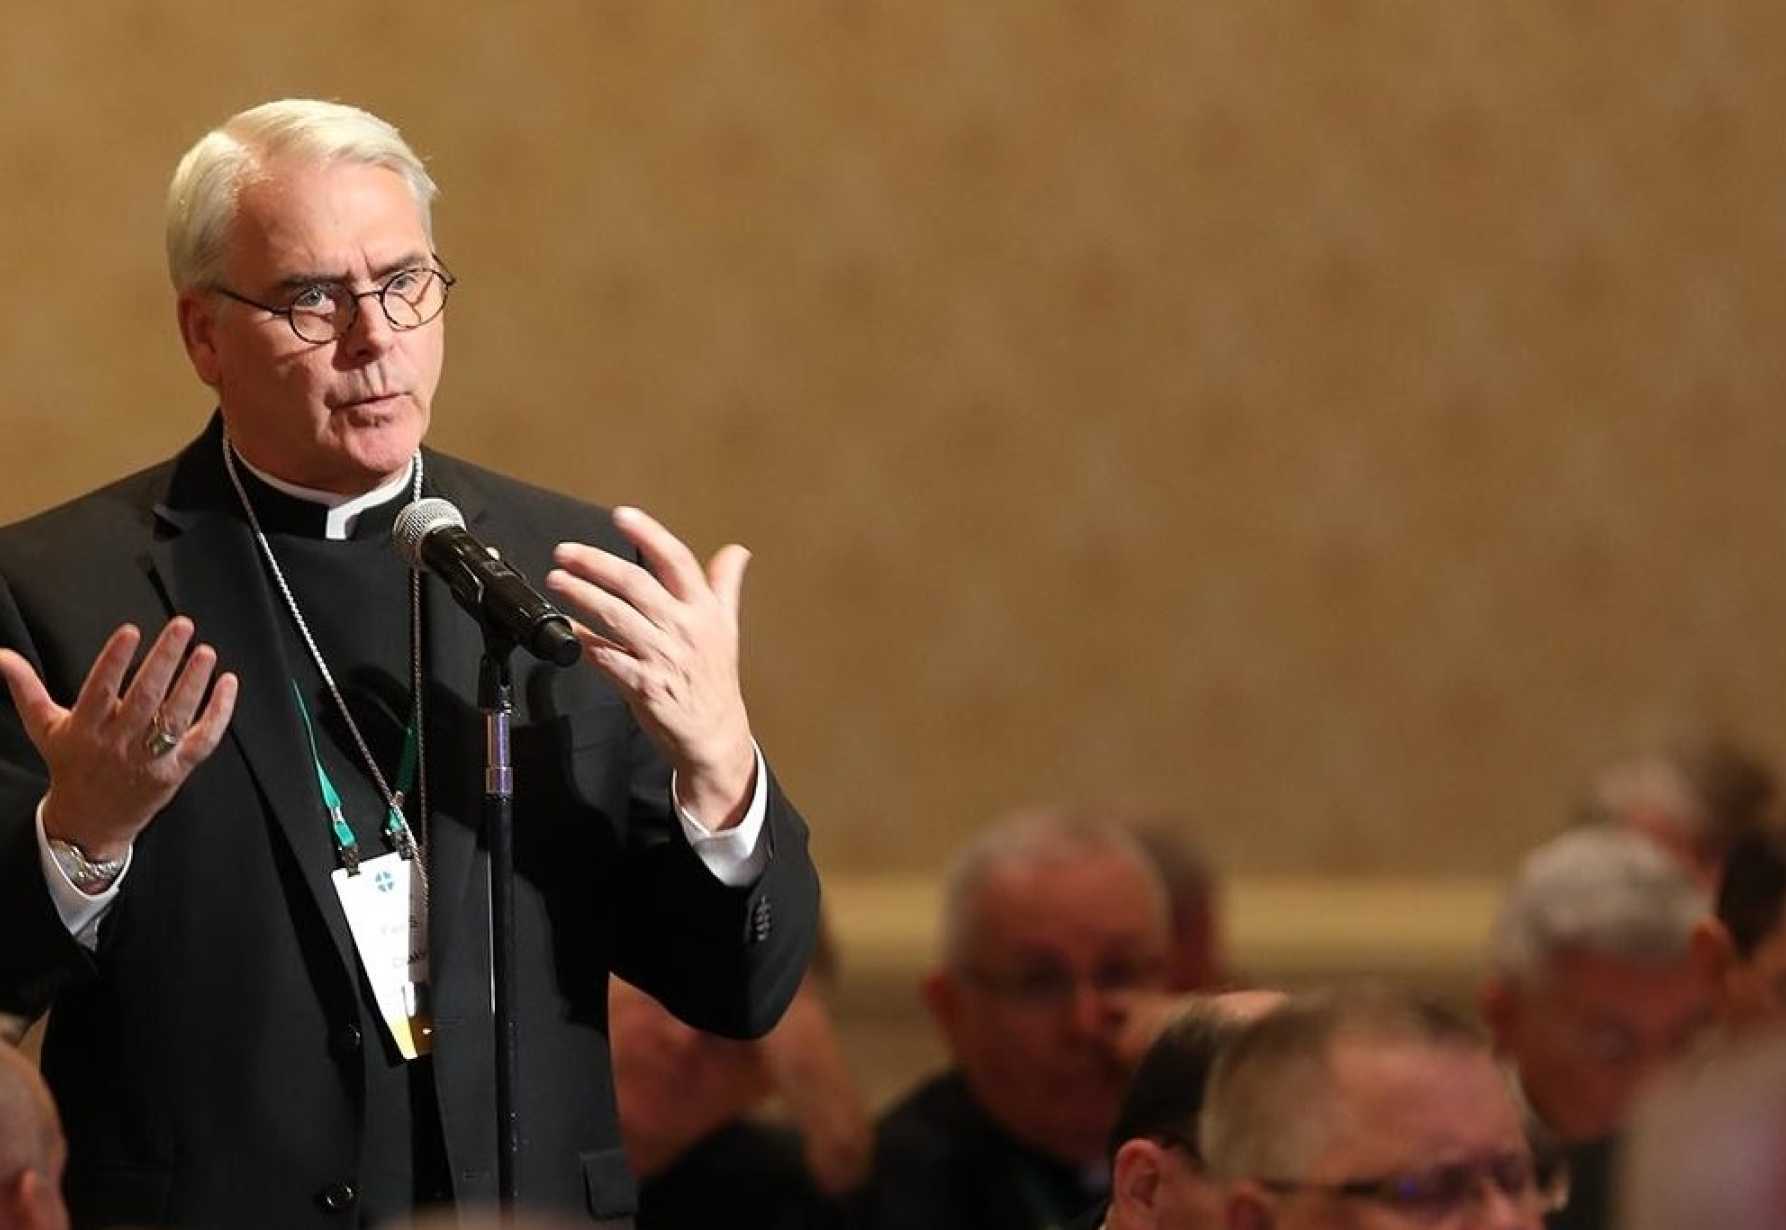 Bishop Chairman Calls on Congress, White House to Reach a Deal on COVID Relief that Prioritizes Urgent Needs 